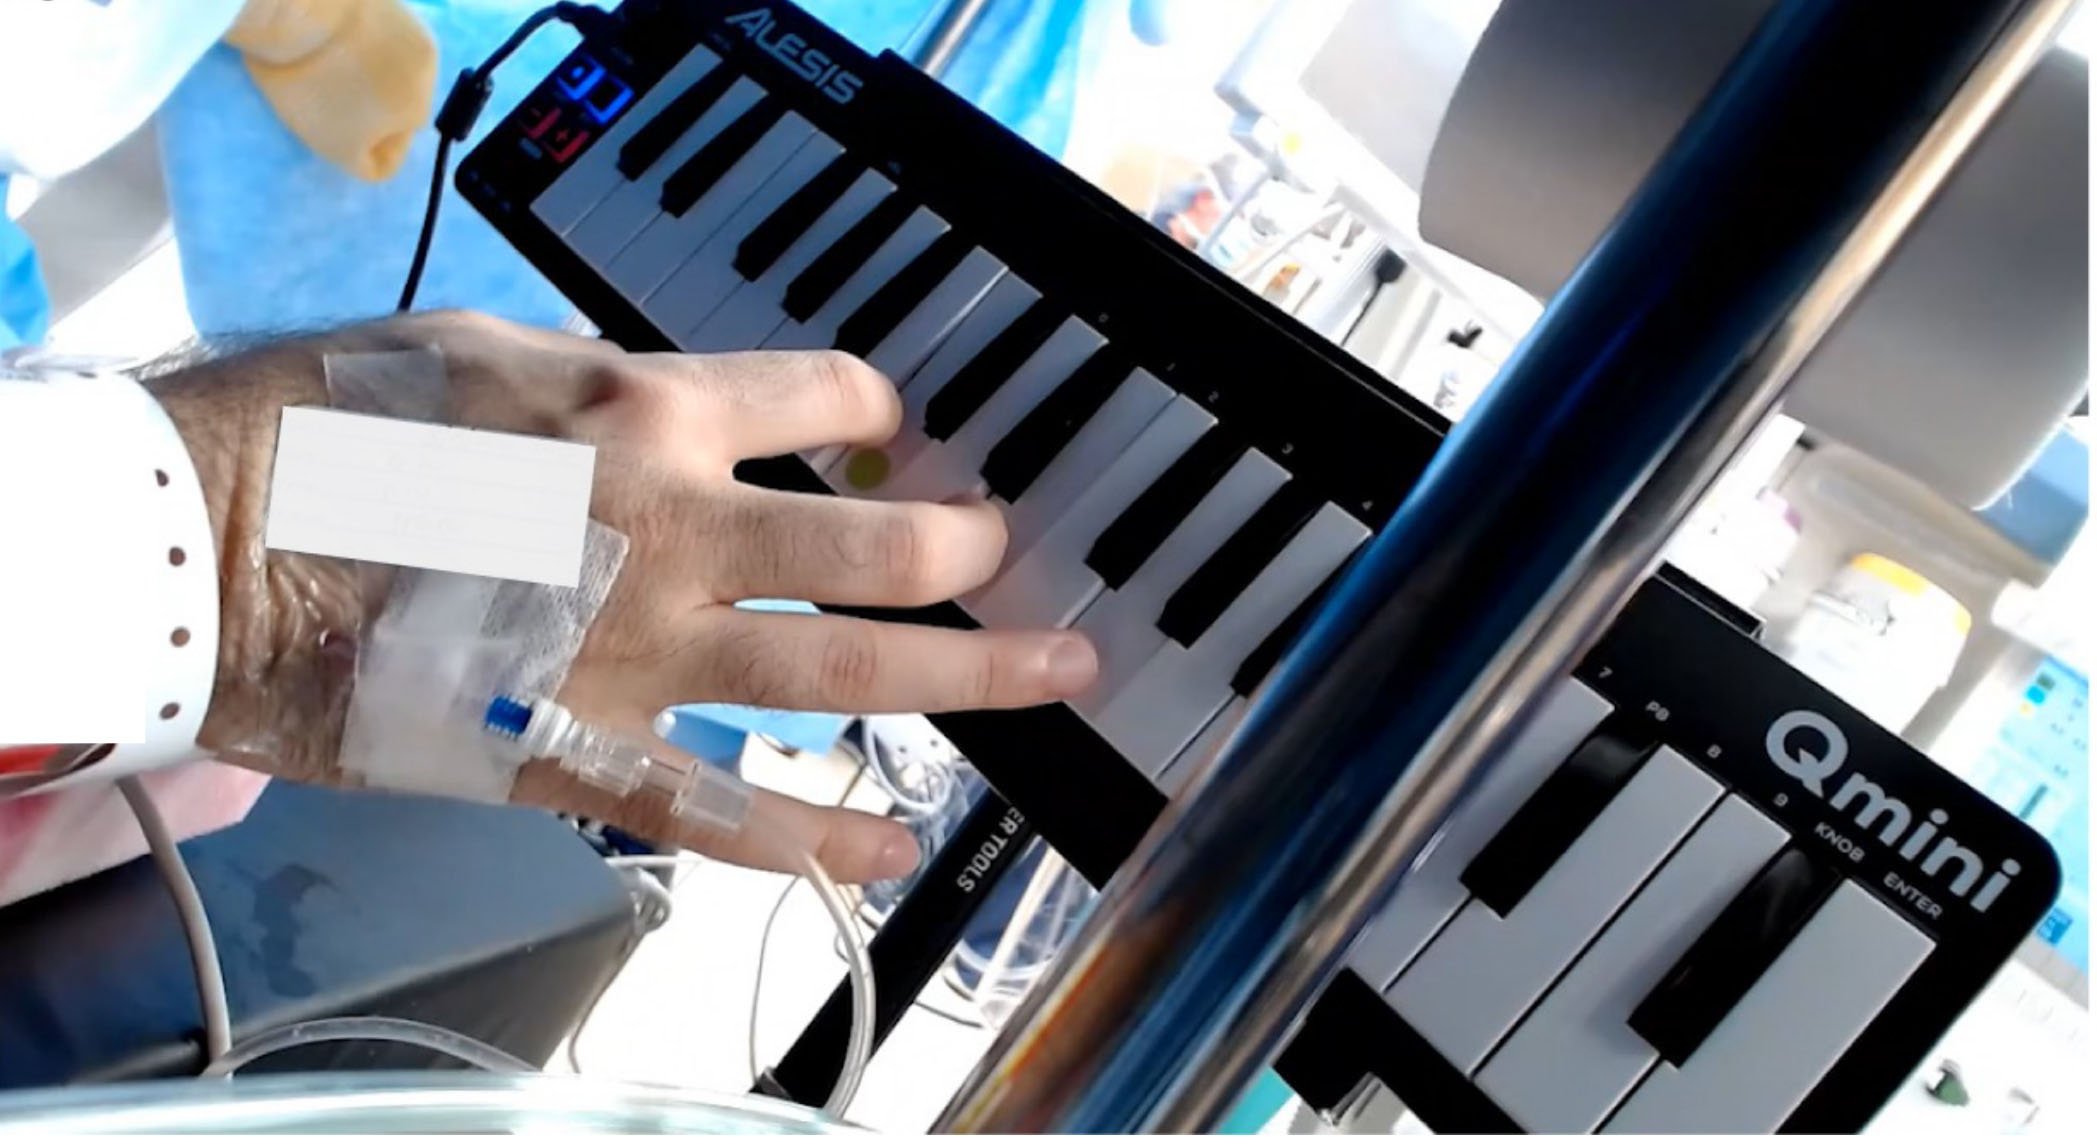 UTHealth Houston researchers observed as a brain tumor patient, who is also a musician, underwent an awake craniotomy while playing a mini-keyboard piano. (Photo provided by Elliot Murphy, PhD)